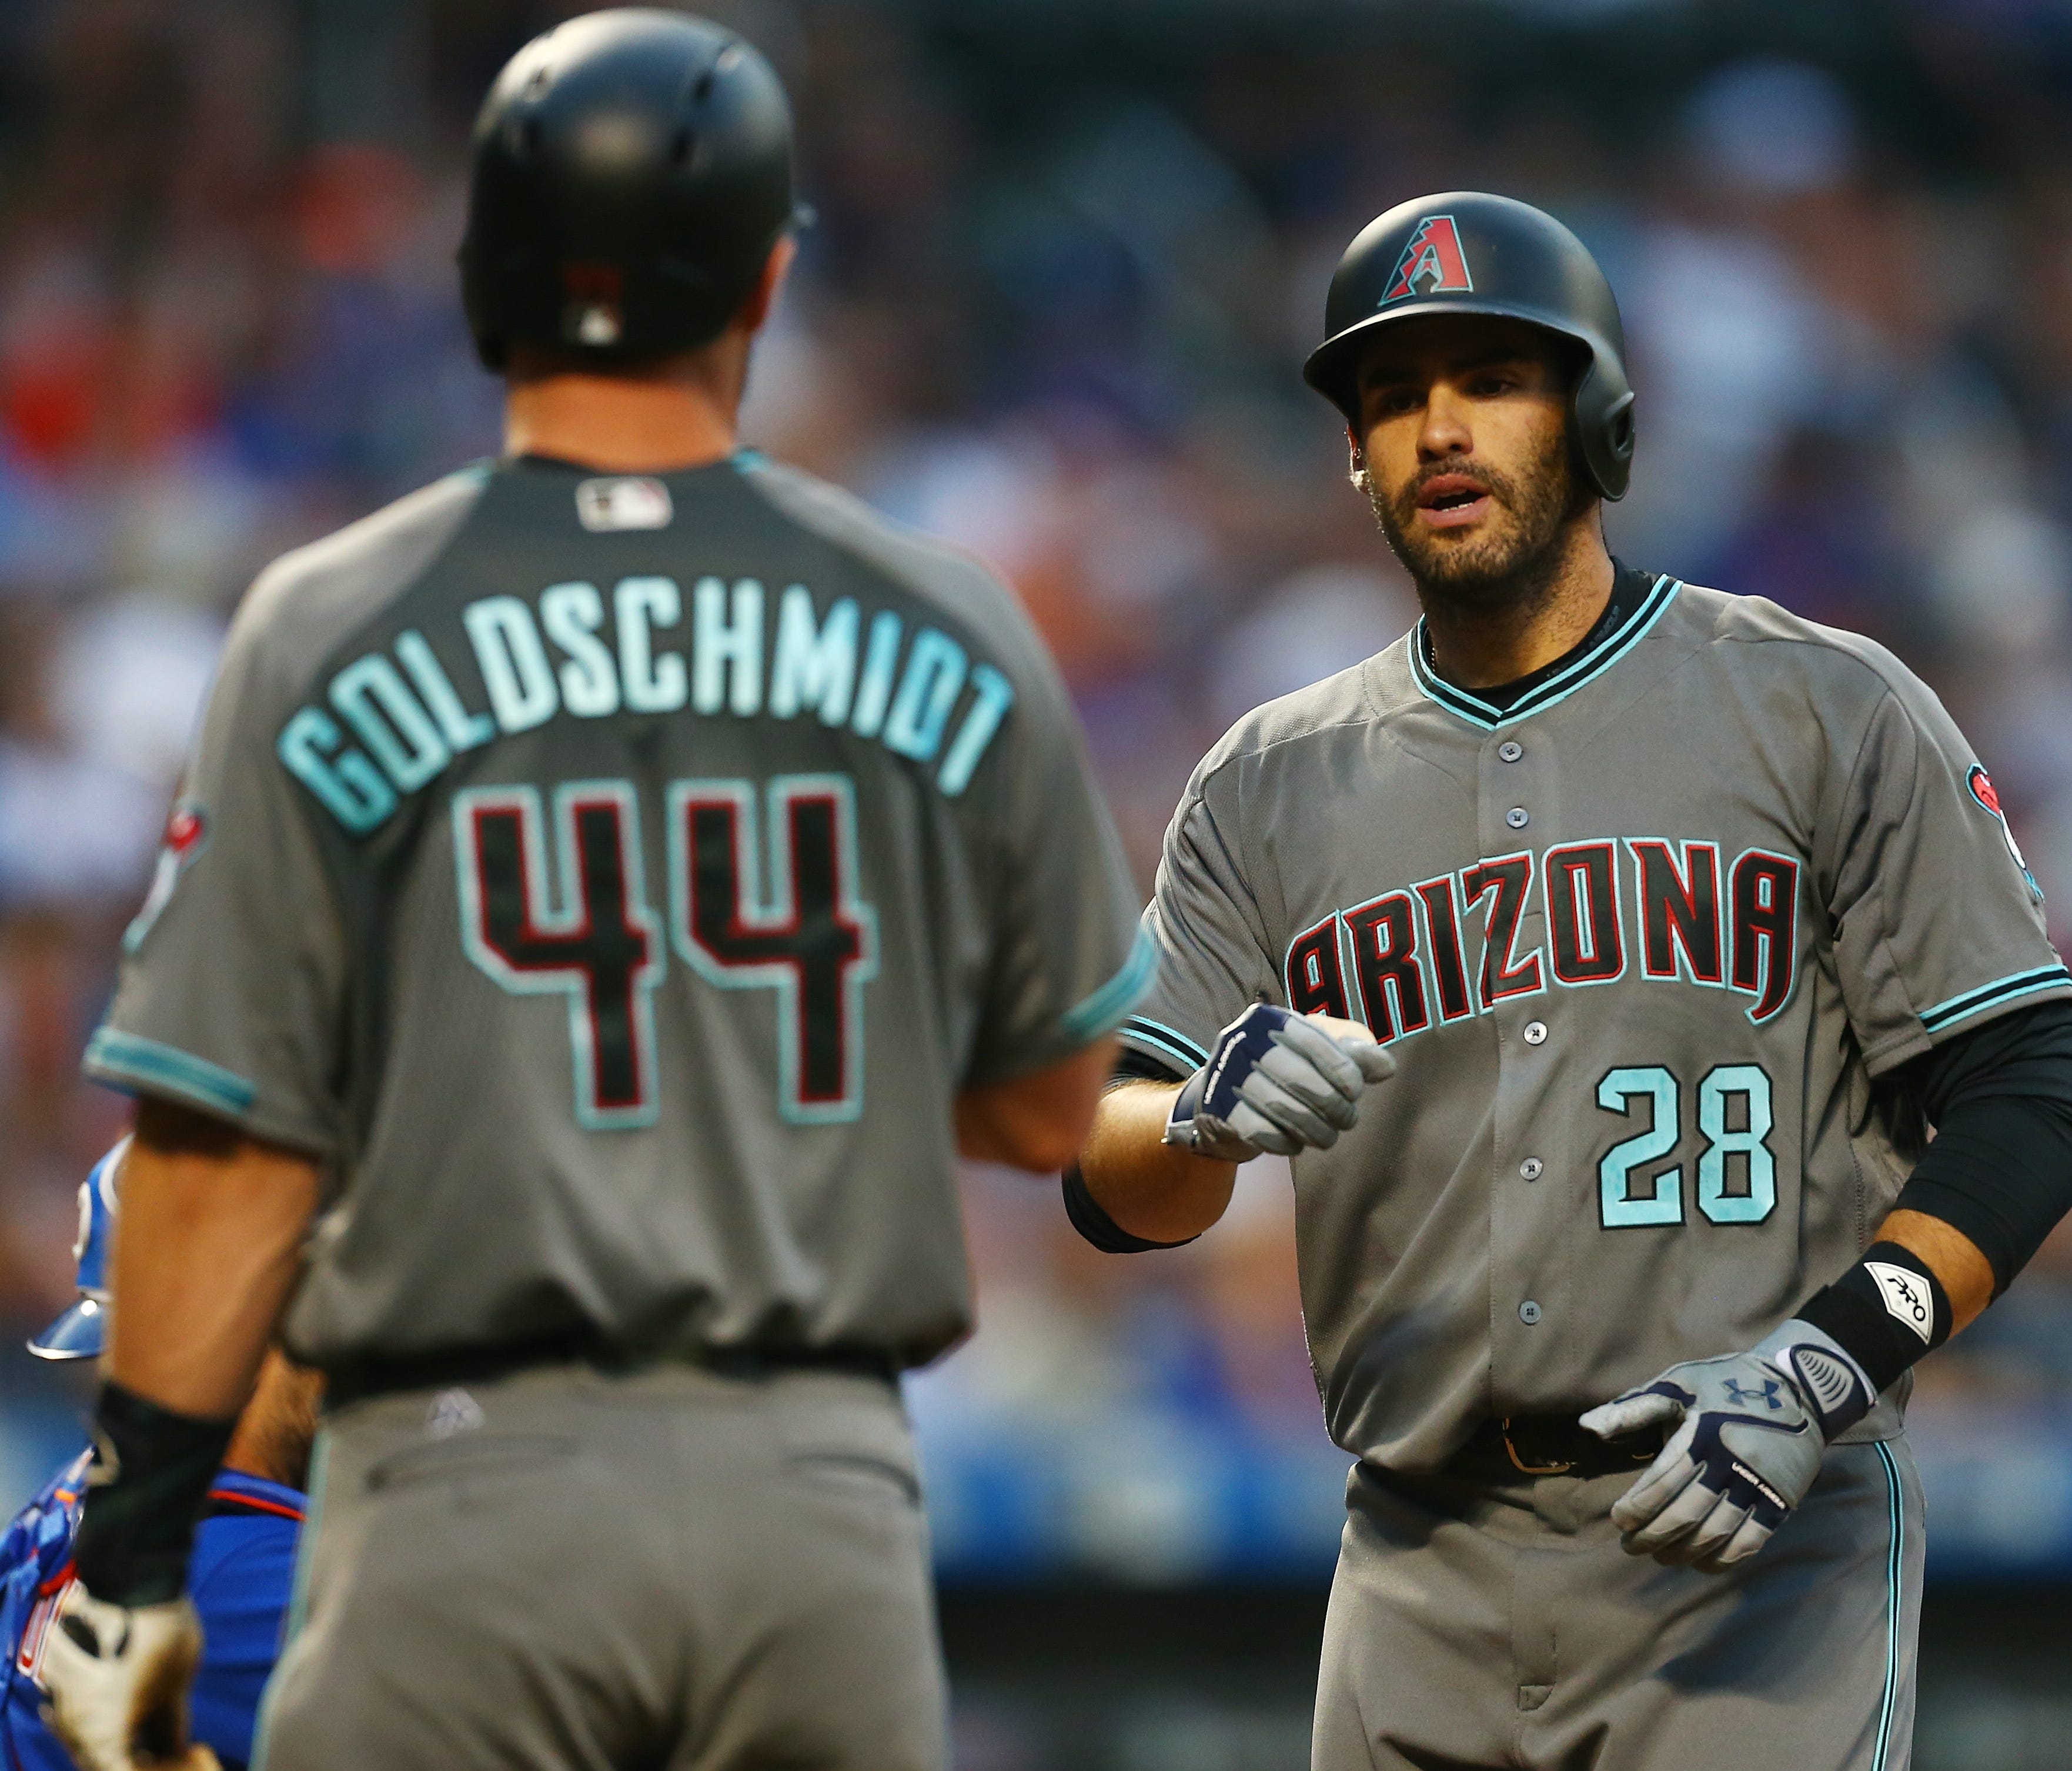 J.D. Martinez has hit 22 home runs since joining Arizona in July, and his presence has buoyed Paul Goldschmidt's performance, too.